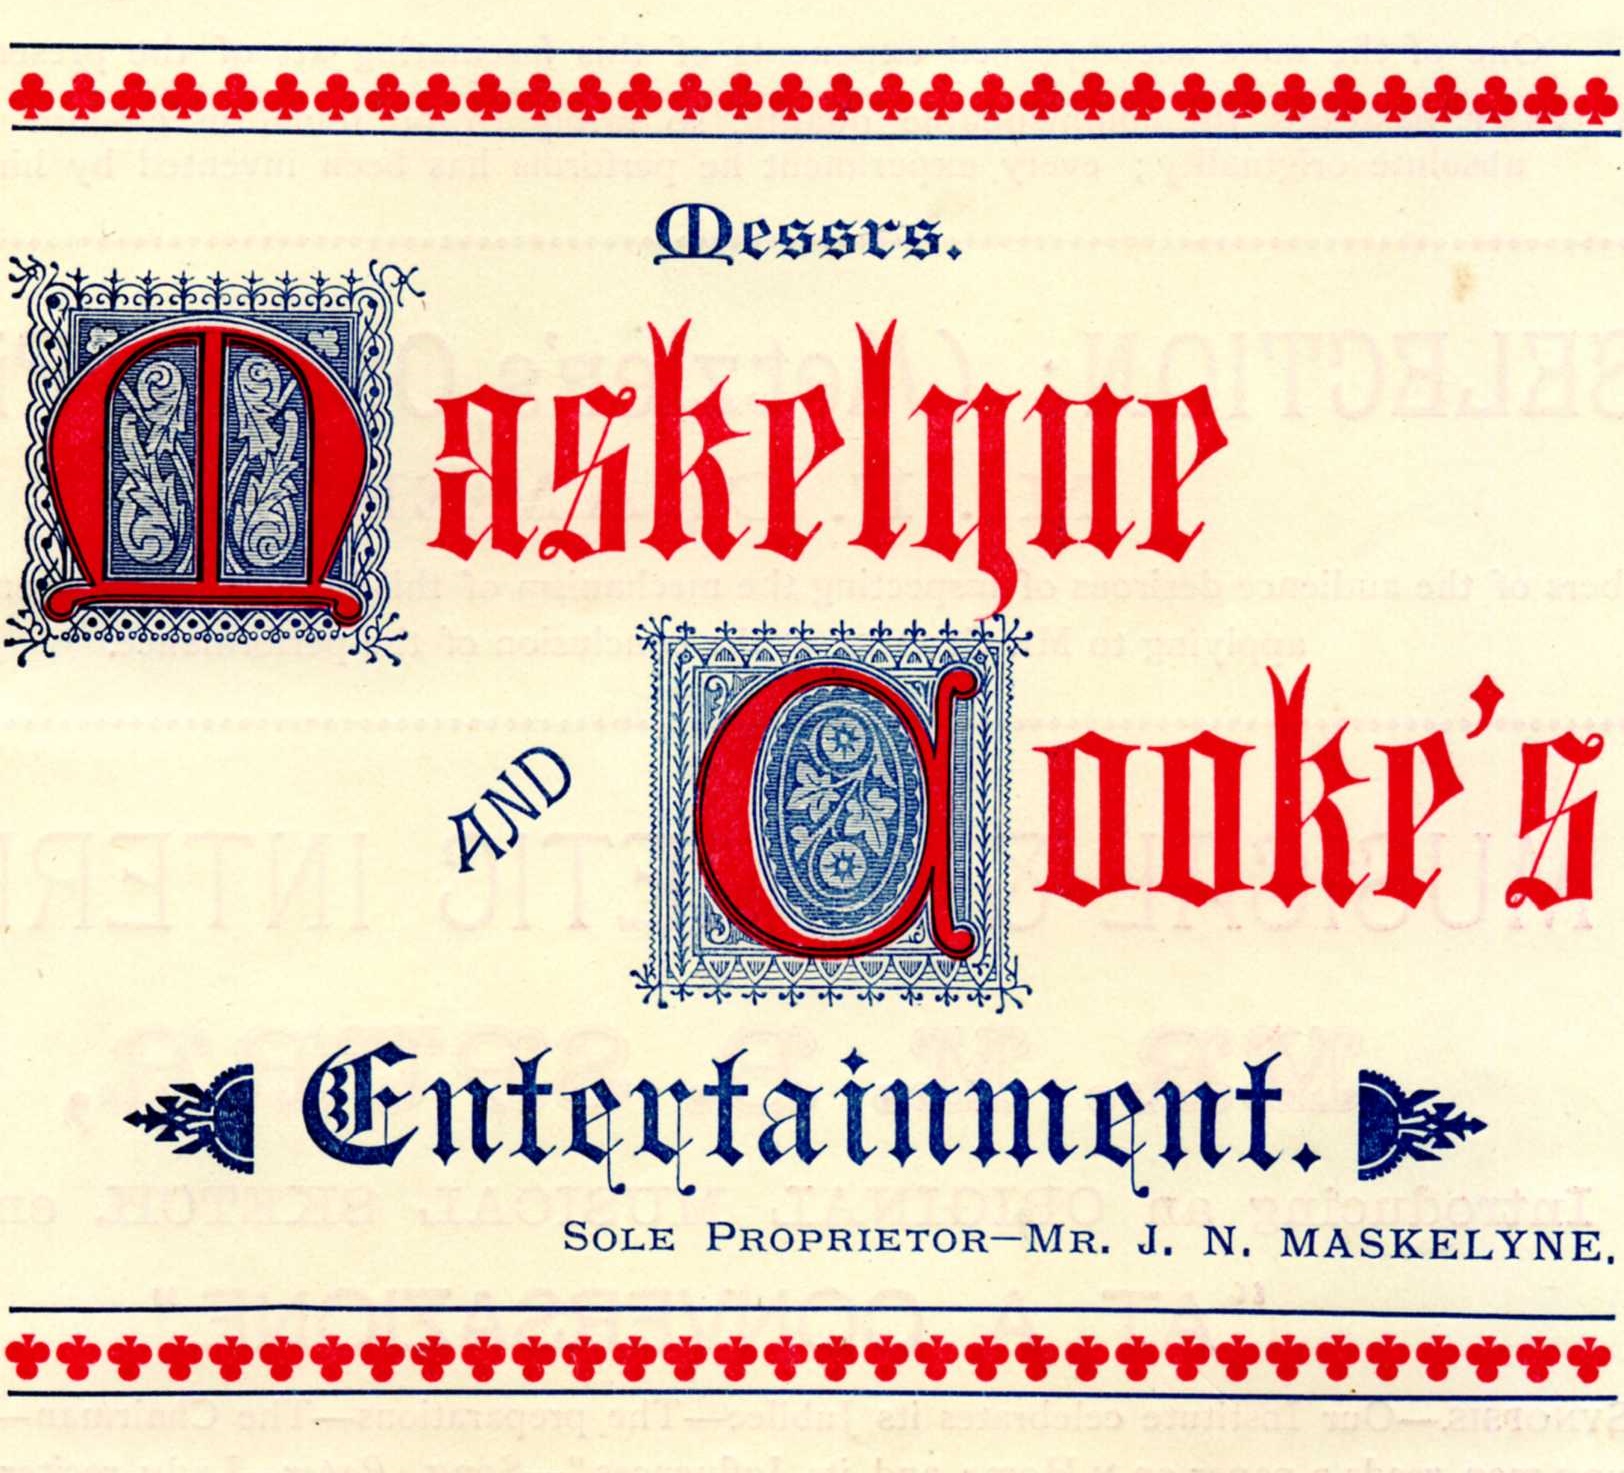 Maskelyne and Cooke’s 1870 claim to be the Royal Illusionists